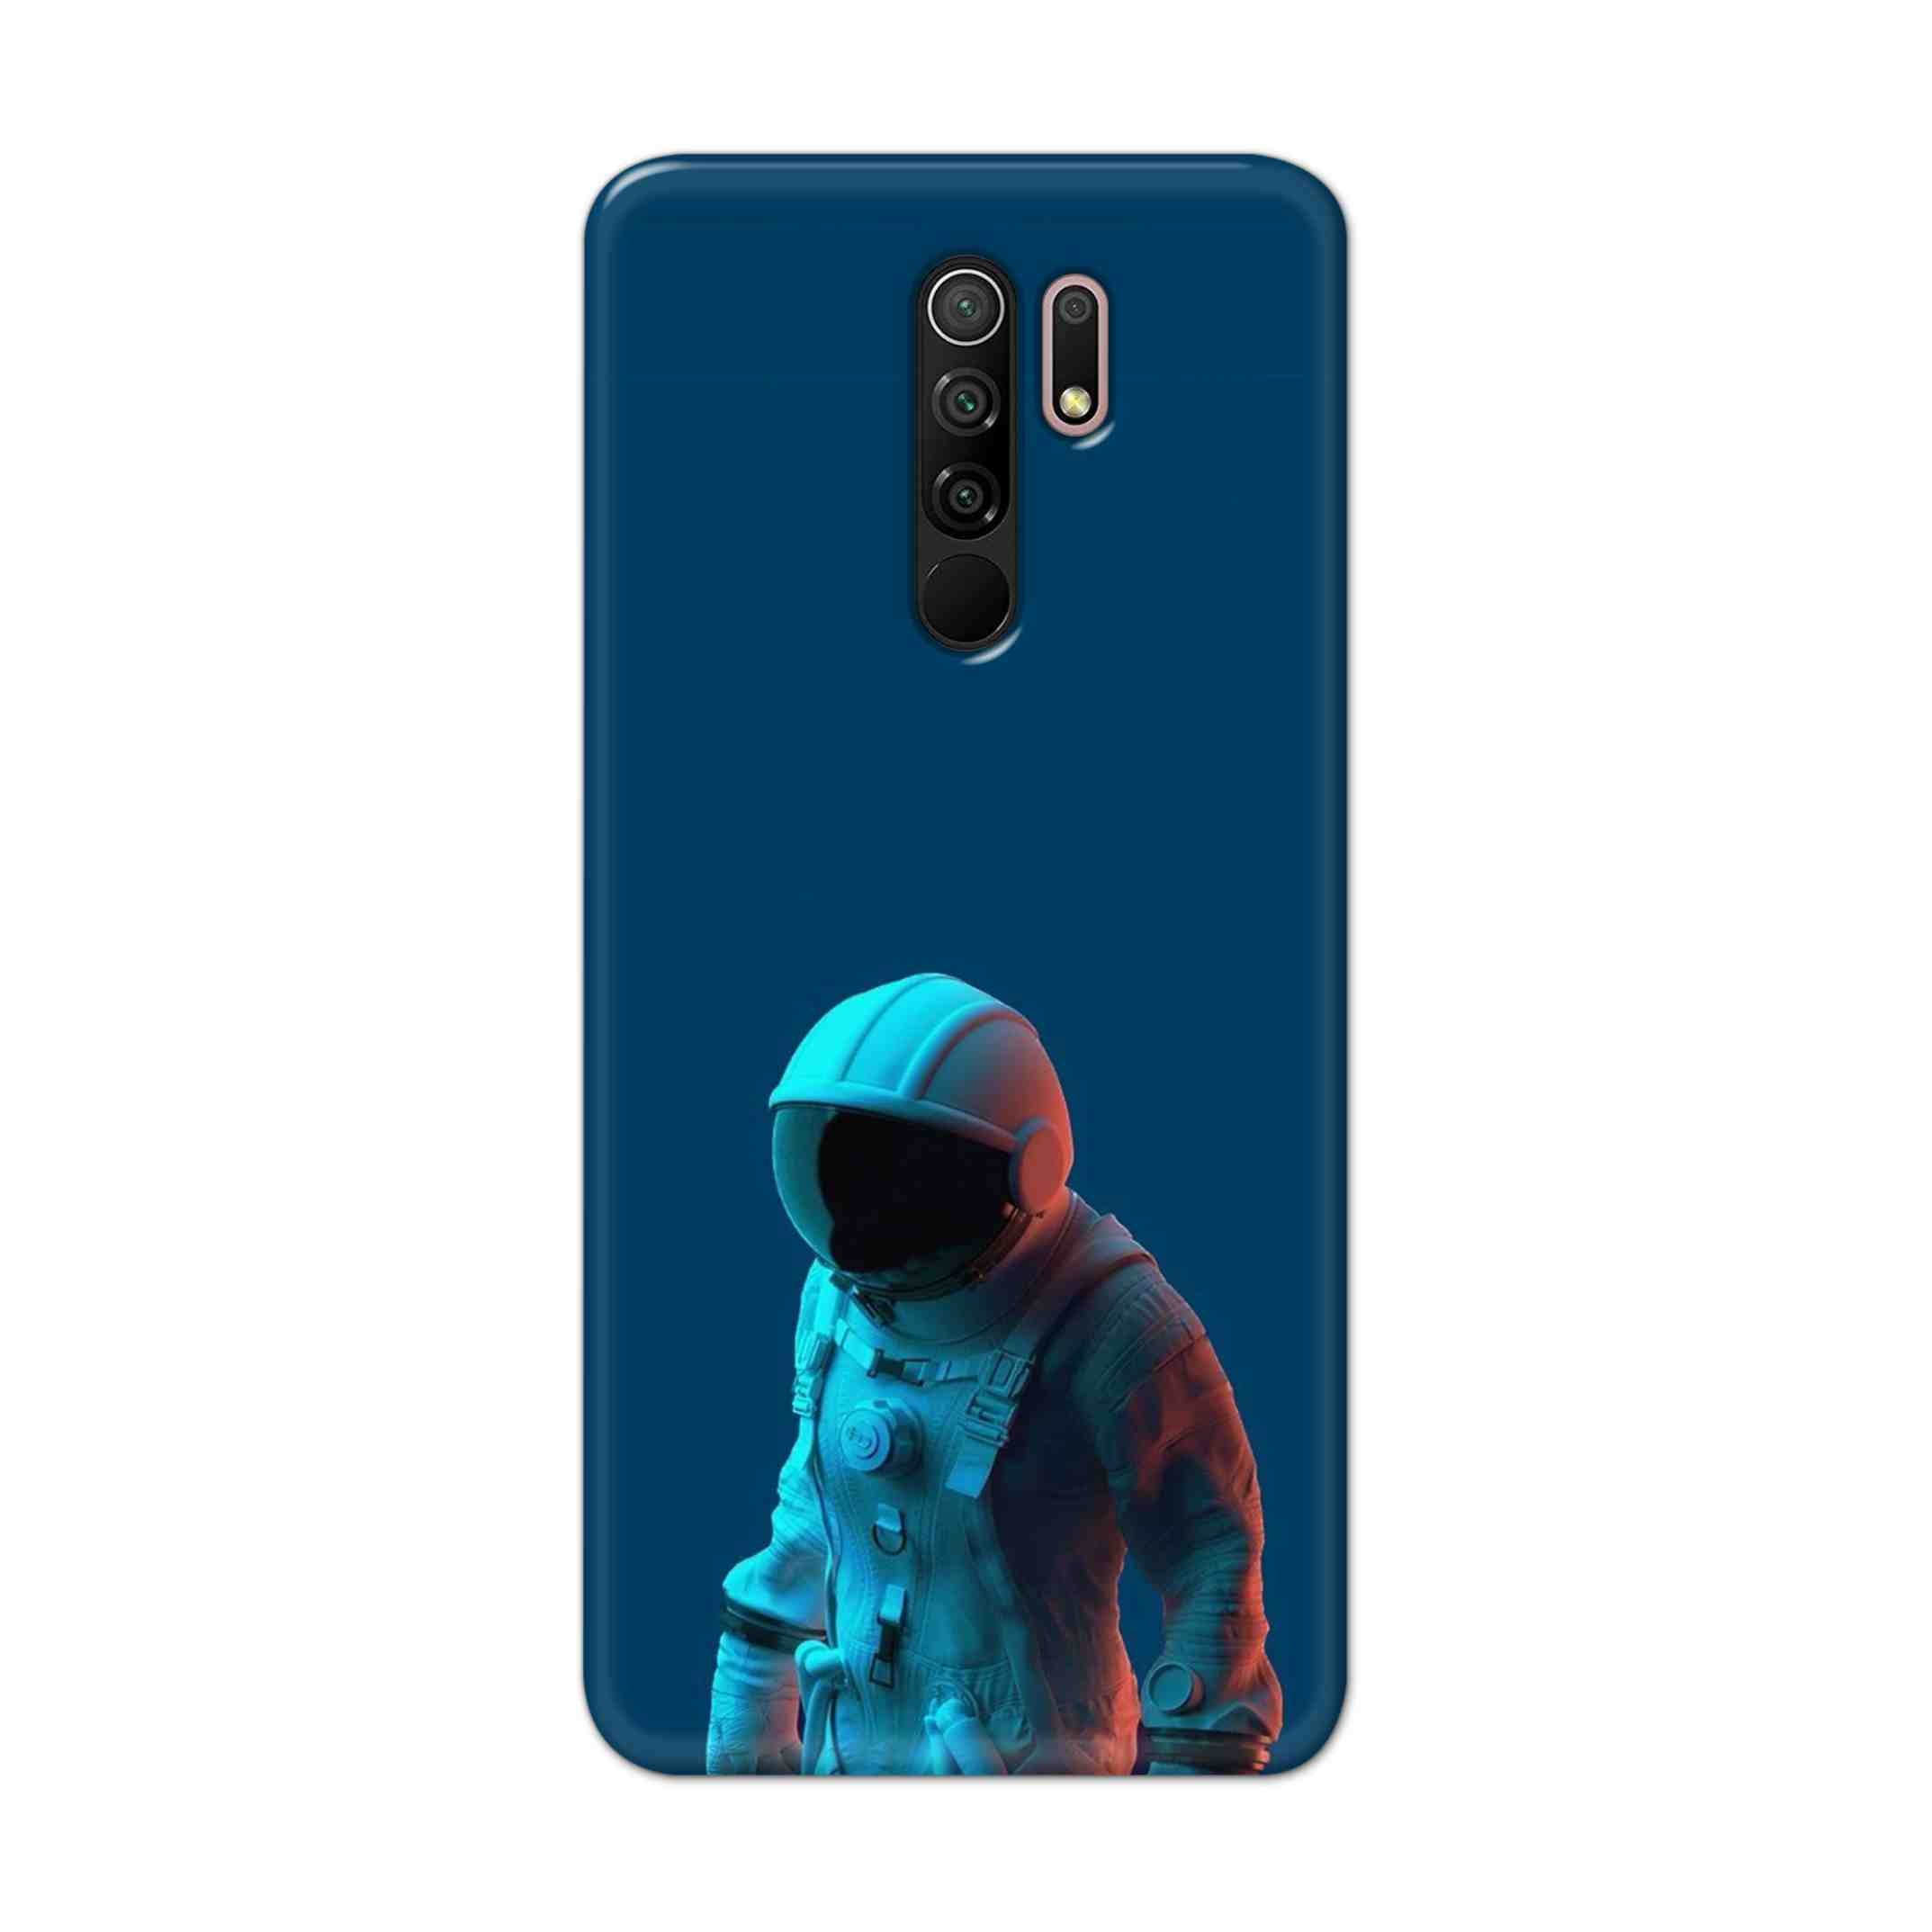 Buy Blue Astronaut Hard Back Mobile Phone Case Cover For Xiaomi Redmi 9 Prime Online